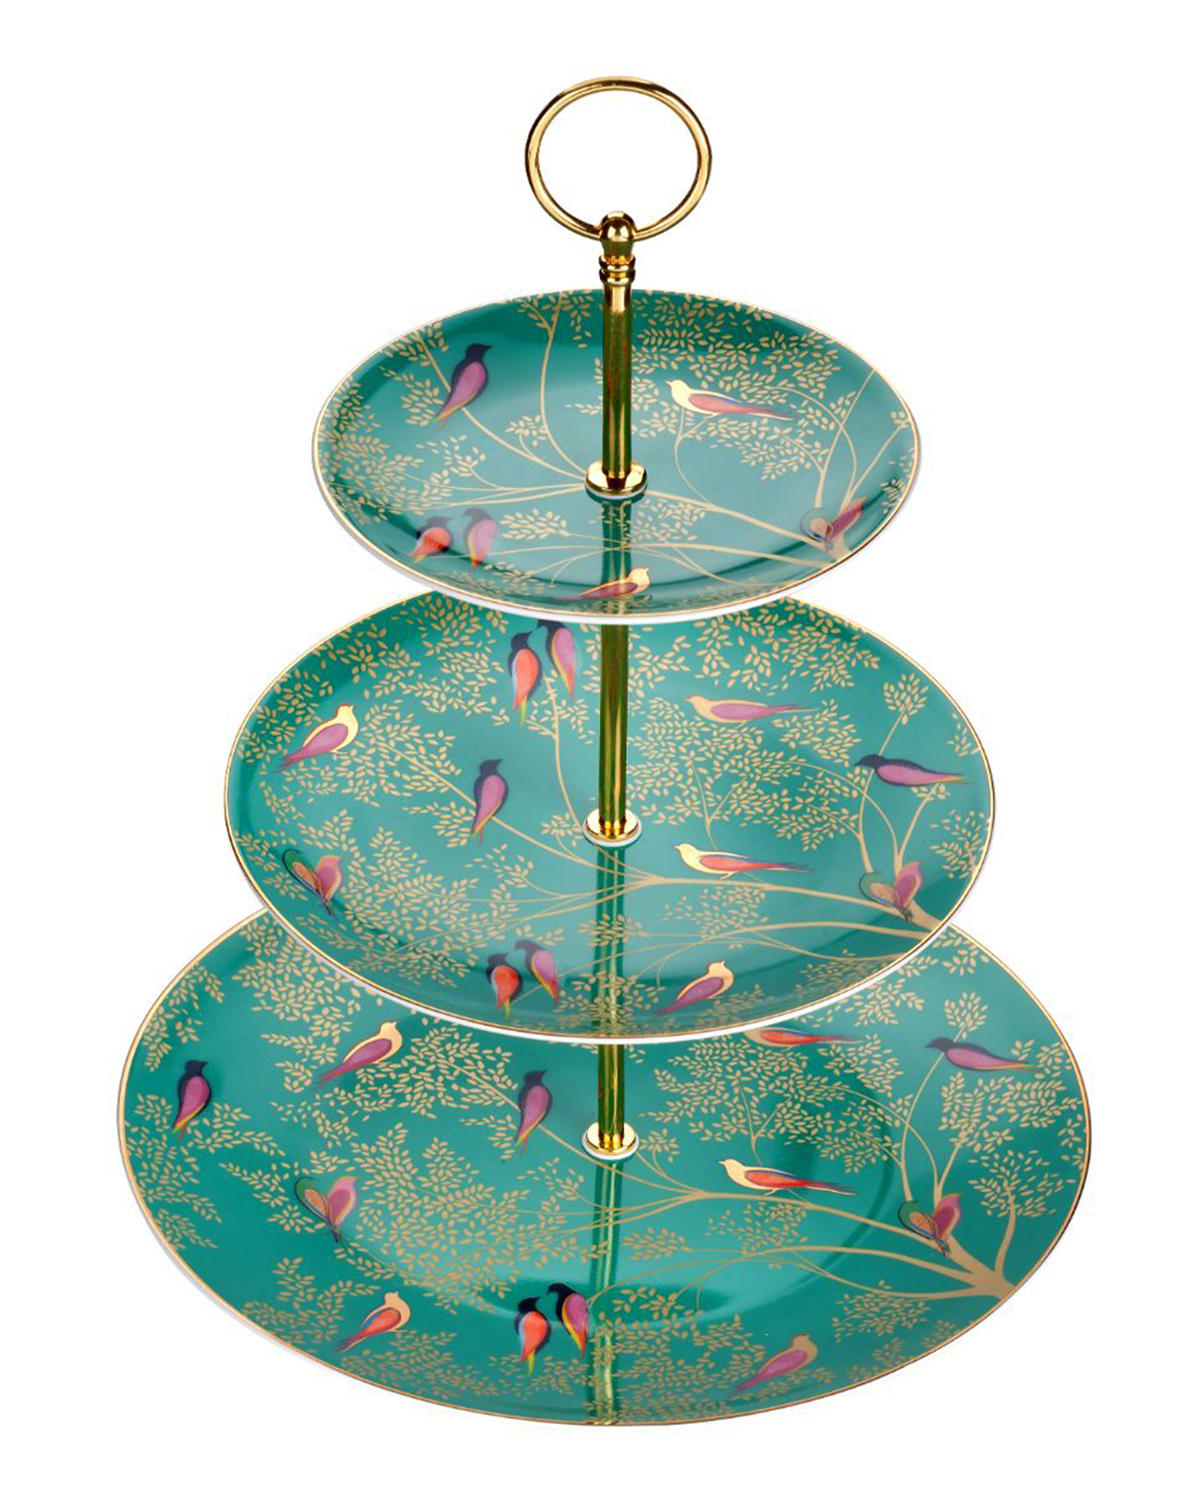 Shop Portmeirion Sara Miller Chelsea Tiered Cake Stand